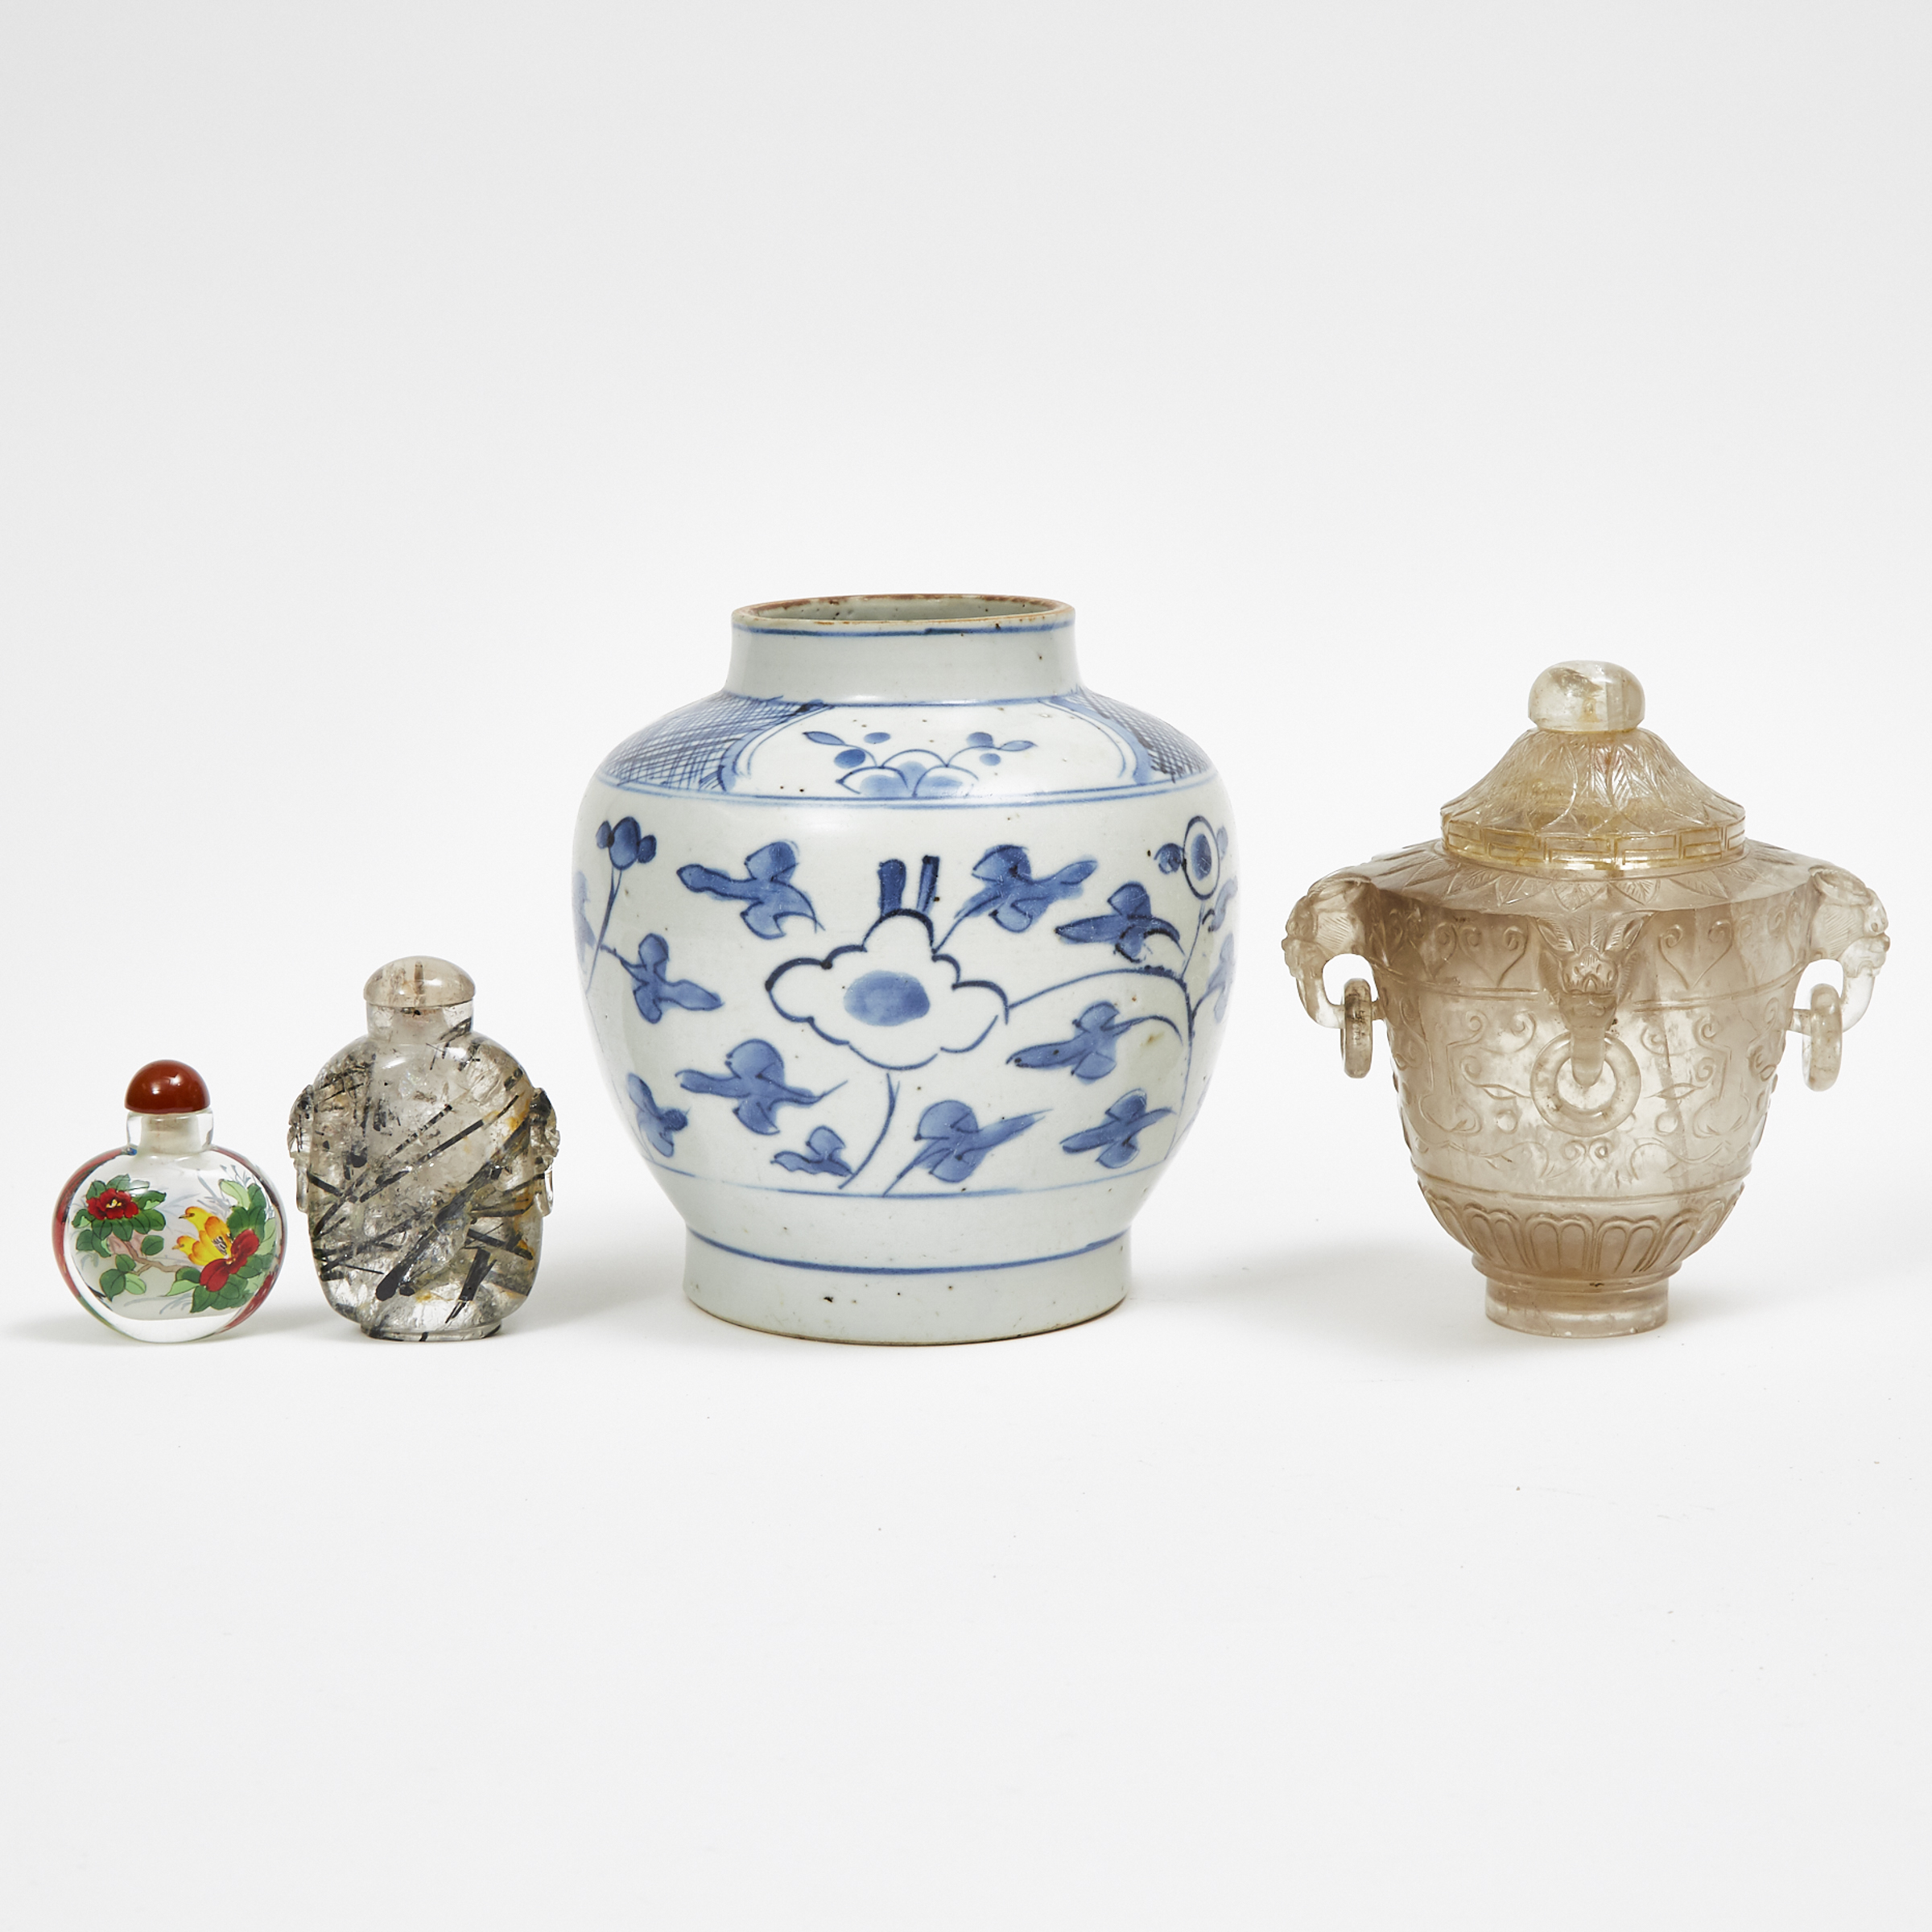 A Group of Four Chinese Wares